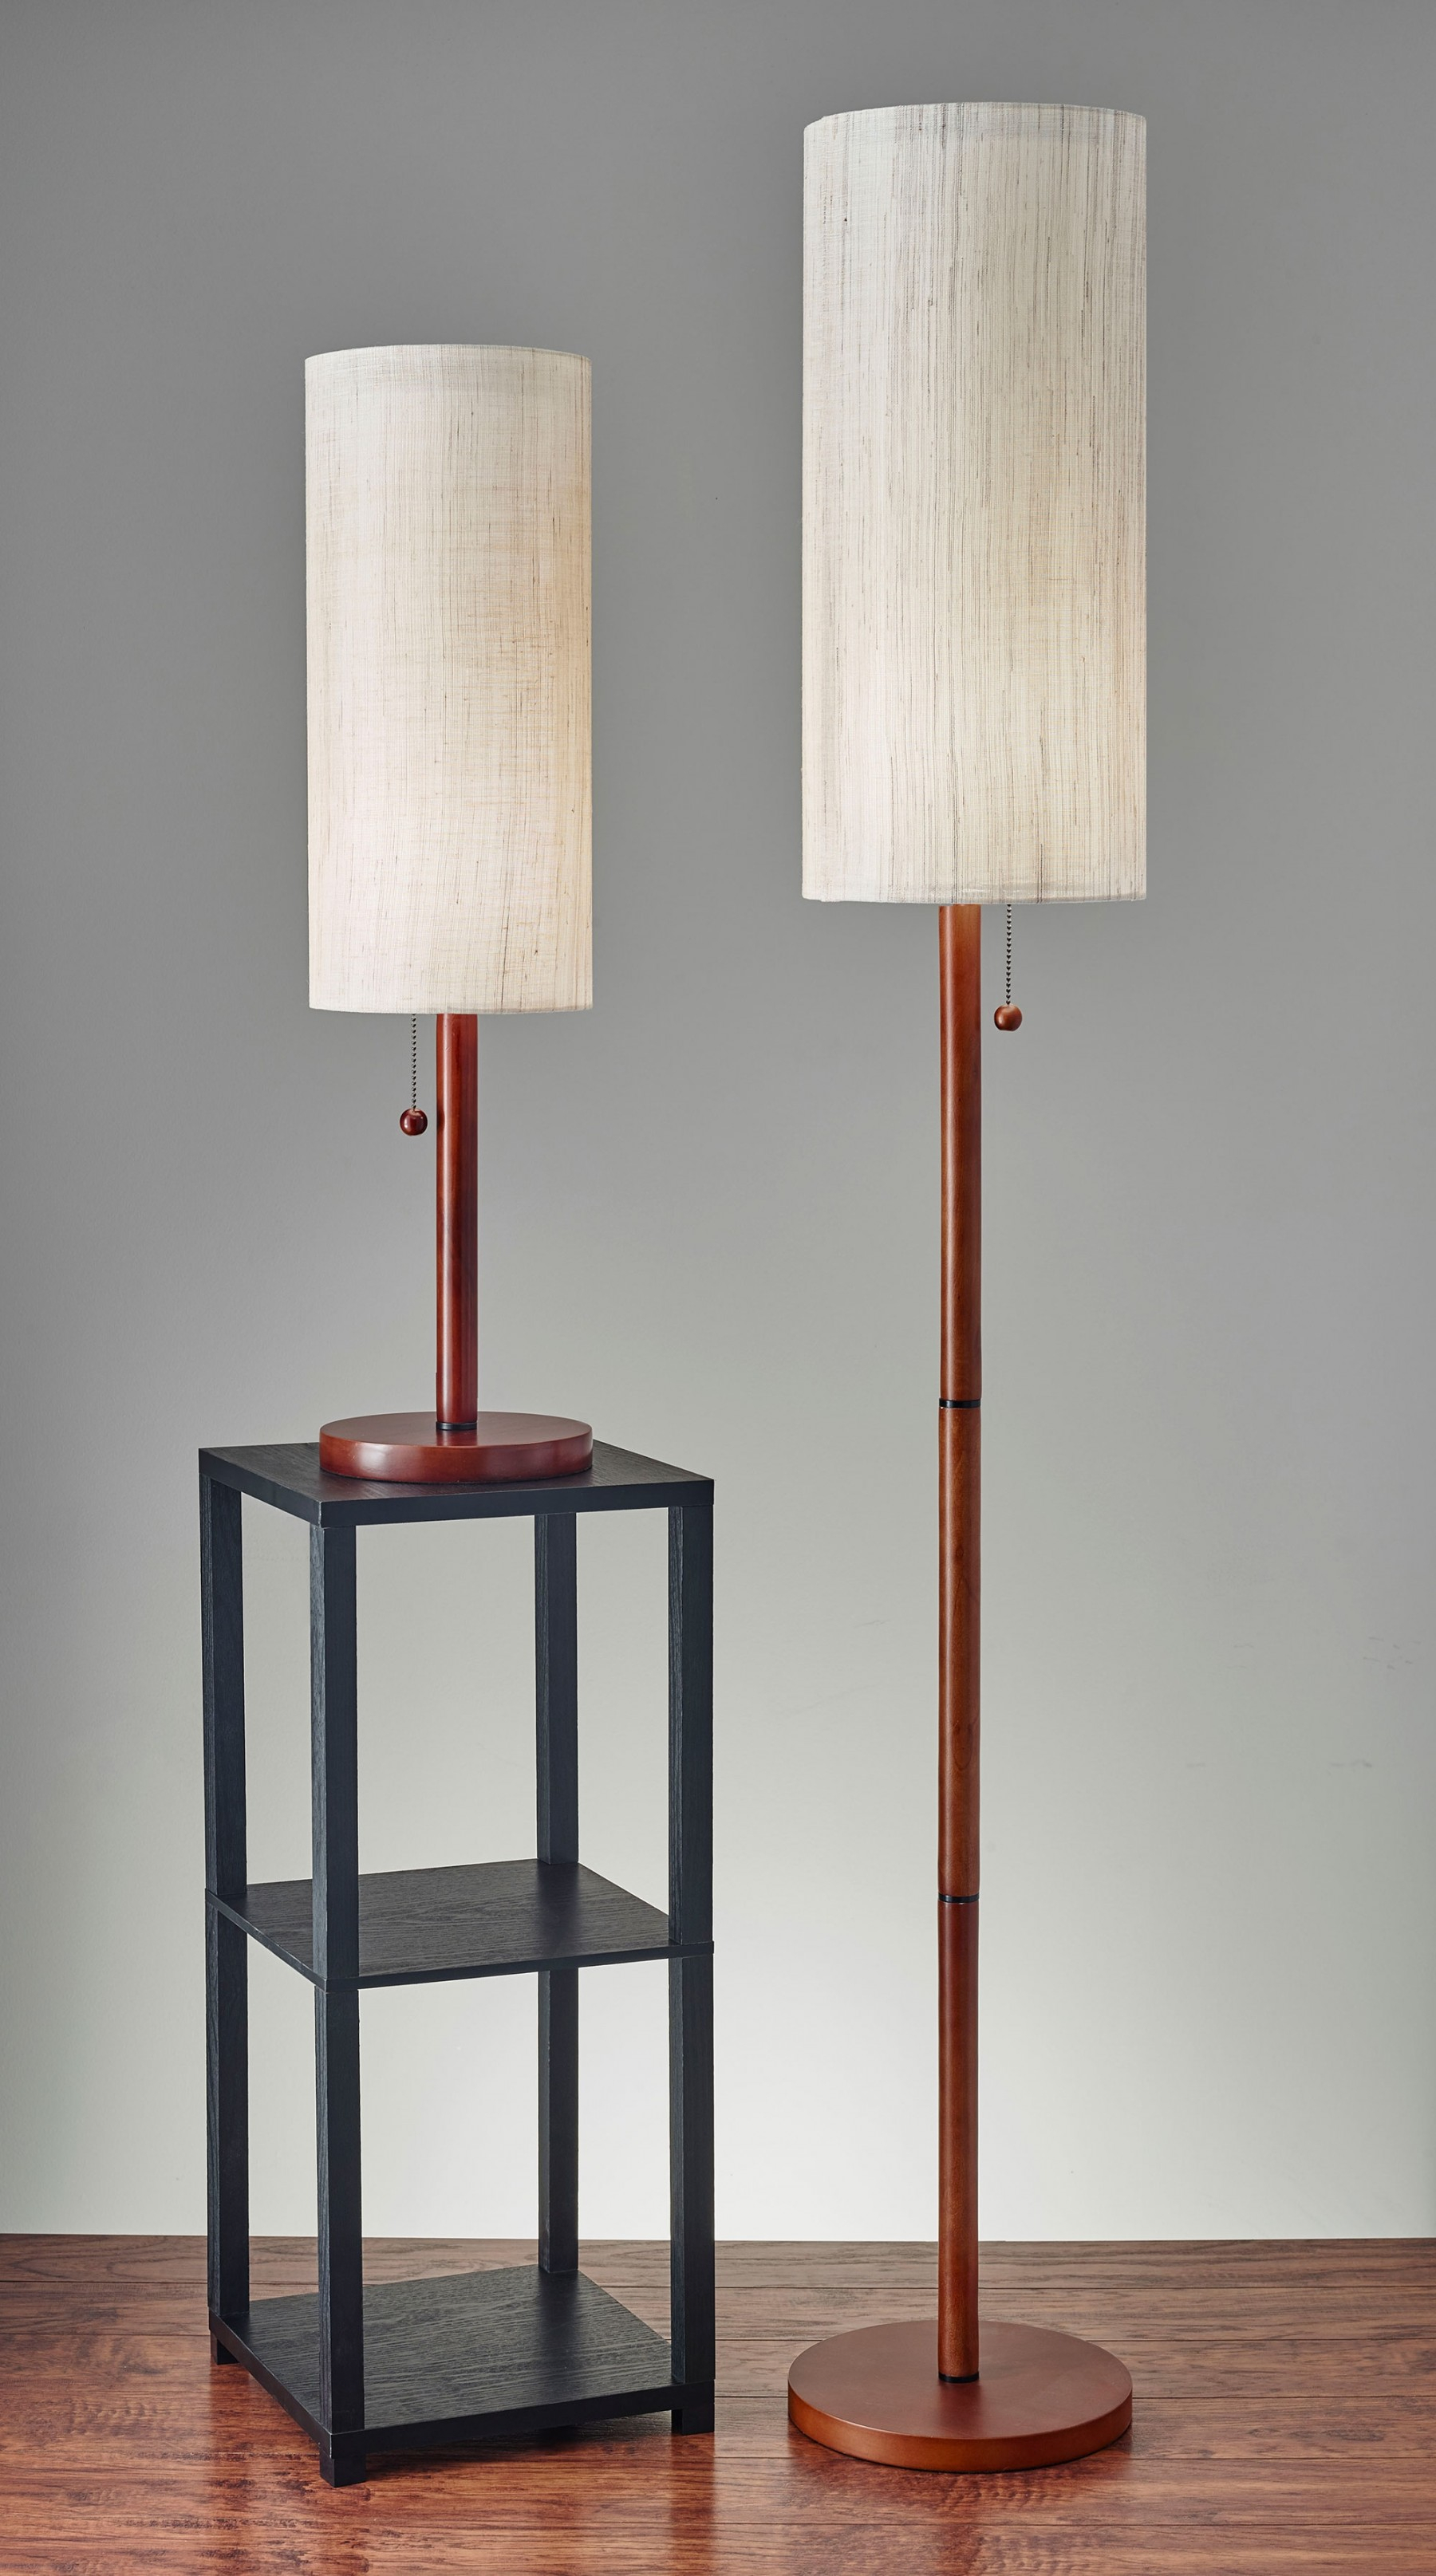 Hamptons Table Lamp Adesso pertaining to size 1800 X 3230